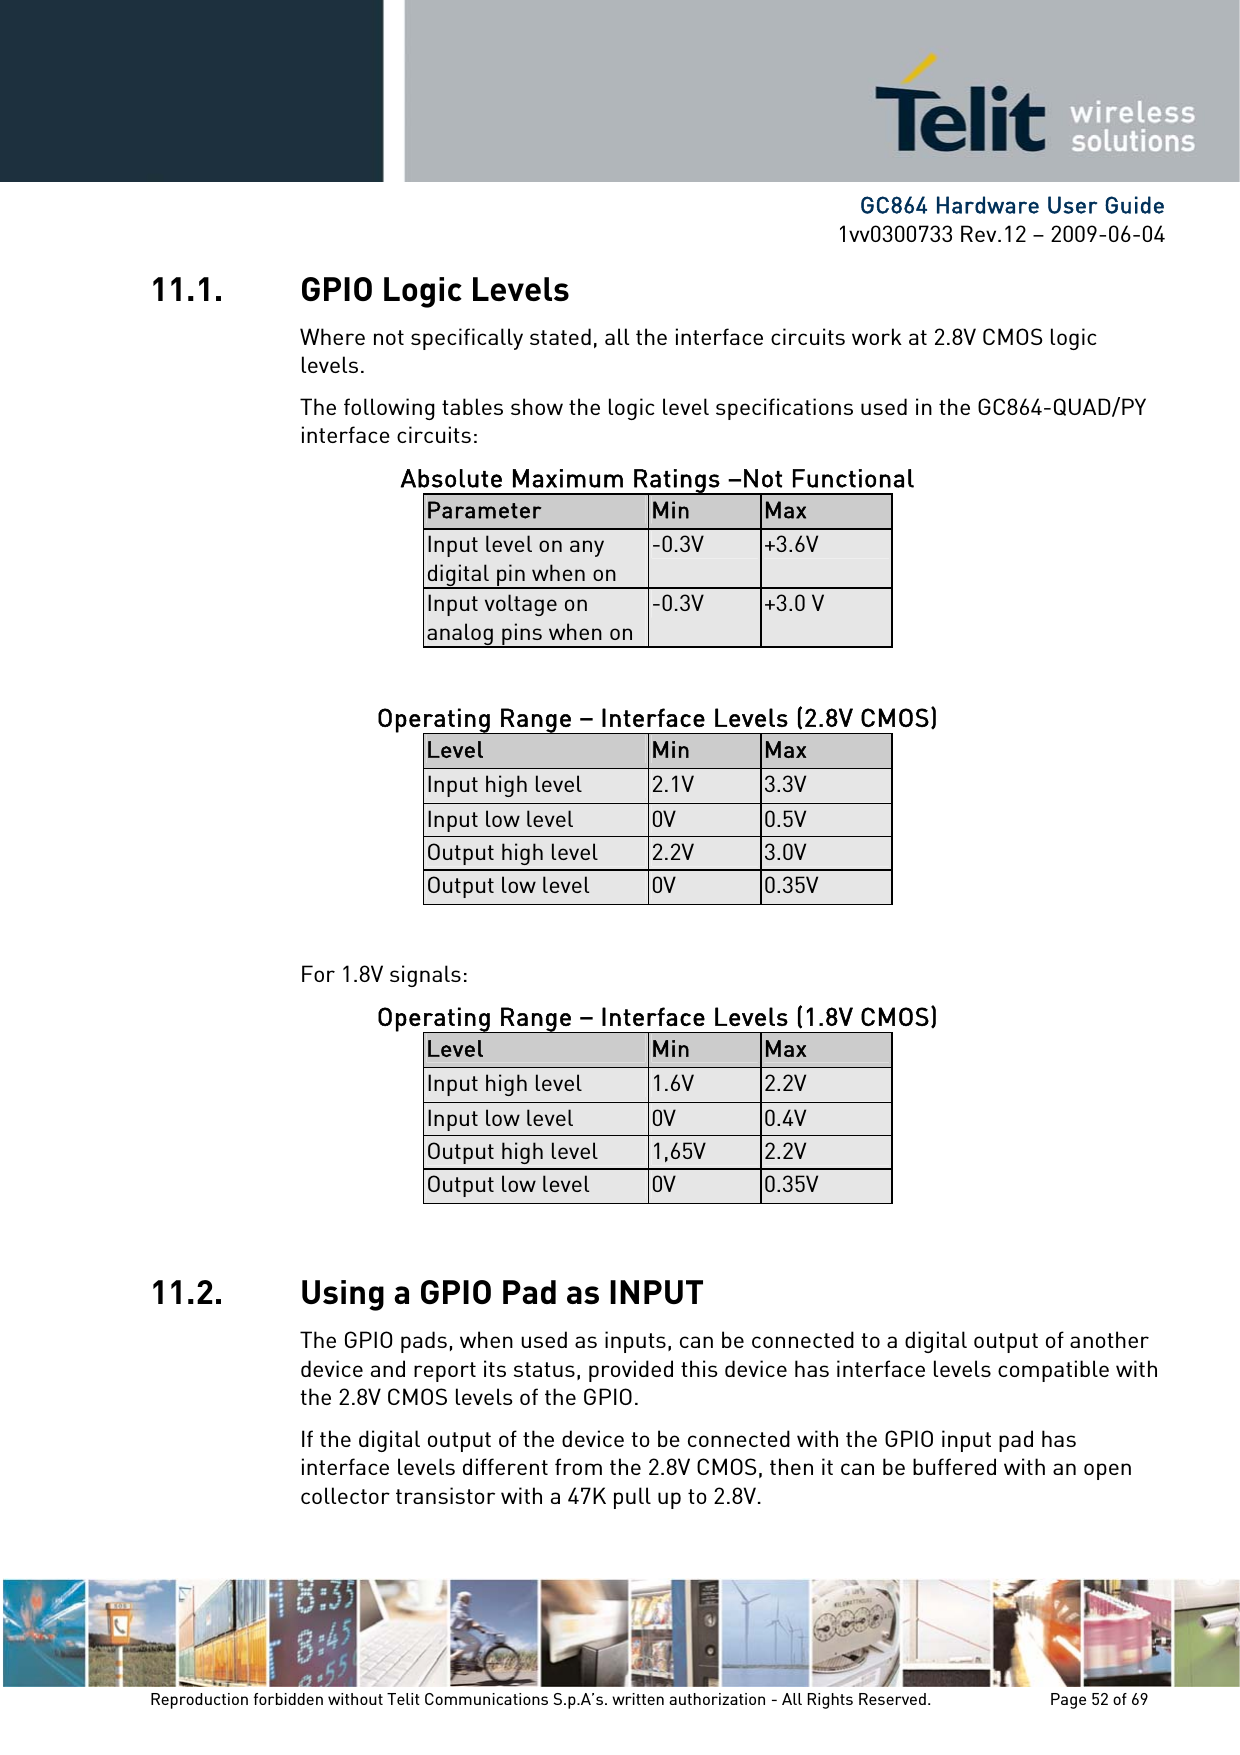      GC864 Hardware User Guide 1vv0300733 Rev.12 – 2009-06-04 11.1. GPIO Logic Levels Where not specifically stated, all the interface circuits work at 2.8V CMOS logic levels. The following tables show the logic level specifications used in the GC864-QUAD/PY interface circuits: Absolute Maximum Ratings –Not Functional Parameter  Min  Max Input level on any digital pin when on -0.3V  +3.6V Input voltage on analog pins when on-0.3V  +3.0 V  Operating Range – Interface Levels (2.8V CMOS) Level  Min  Max Input high level  2.1V  3.3V Input low level  0V  0.5V Output high level  2.2V  3.0V Output low level  0V  0.35V  For 1.8V signals: Operating Range – Interface Levels (1.8V CMOS) Level  Min  Max Input high level  1.6V  2.2V Input low level  0V  0.4V Output high level  1,65V  2.2V Output low level  0V  0.35V  11.2. Using a GPIO Pad as INPUT The GPIO pads, when used as inputs, can be connected to a digital output of another device and report its status, provided this device has interface levels compatible with the 2.8V CMOS levels of the GPIO.  If the digital output of the device to be connected with the GPIO input pad has interface levels different from the 2.8V CMOS, then it can be buffered with an open collector transistor with a 47K pull up to 2.8V. Reproduction forbidden without Telit Communications S.p.A’s. written authorization - All Rights Reserved.    Page 52 of 69  